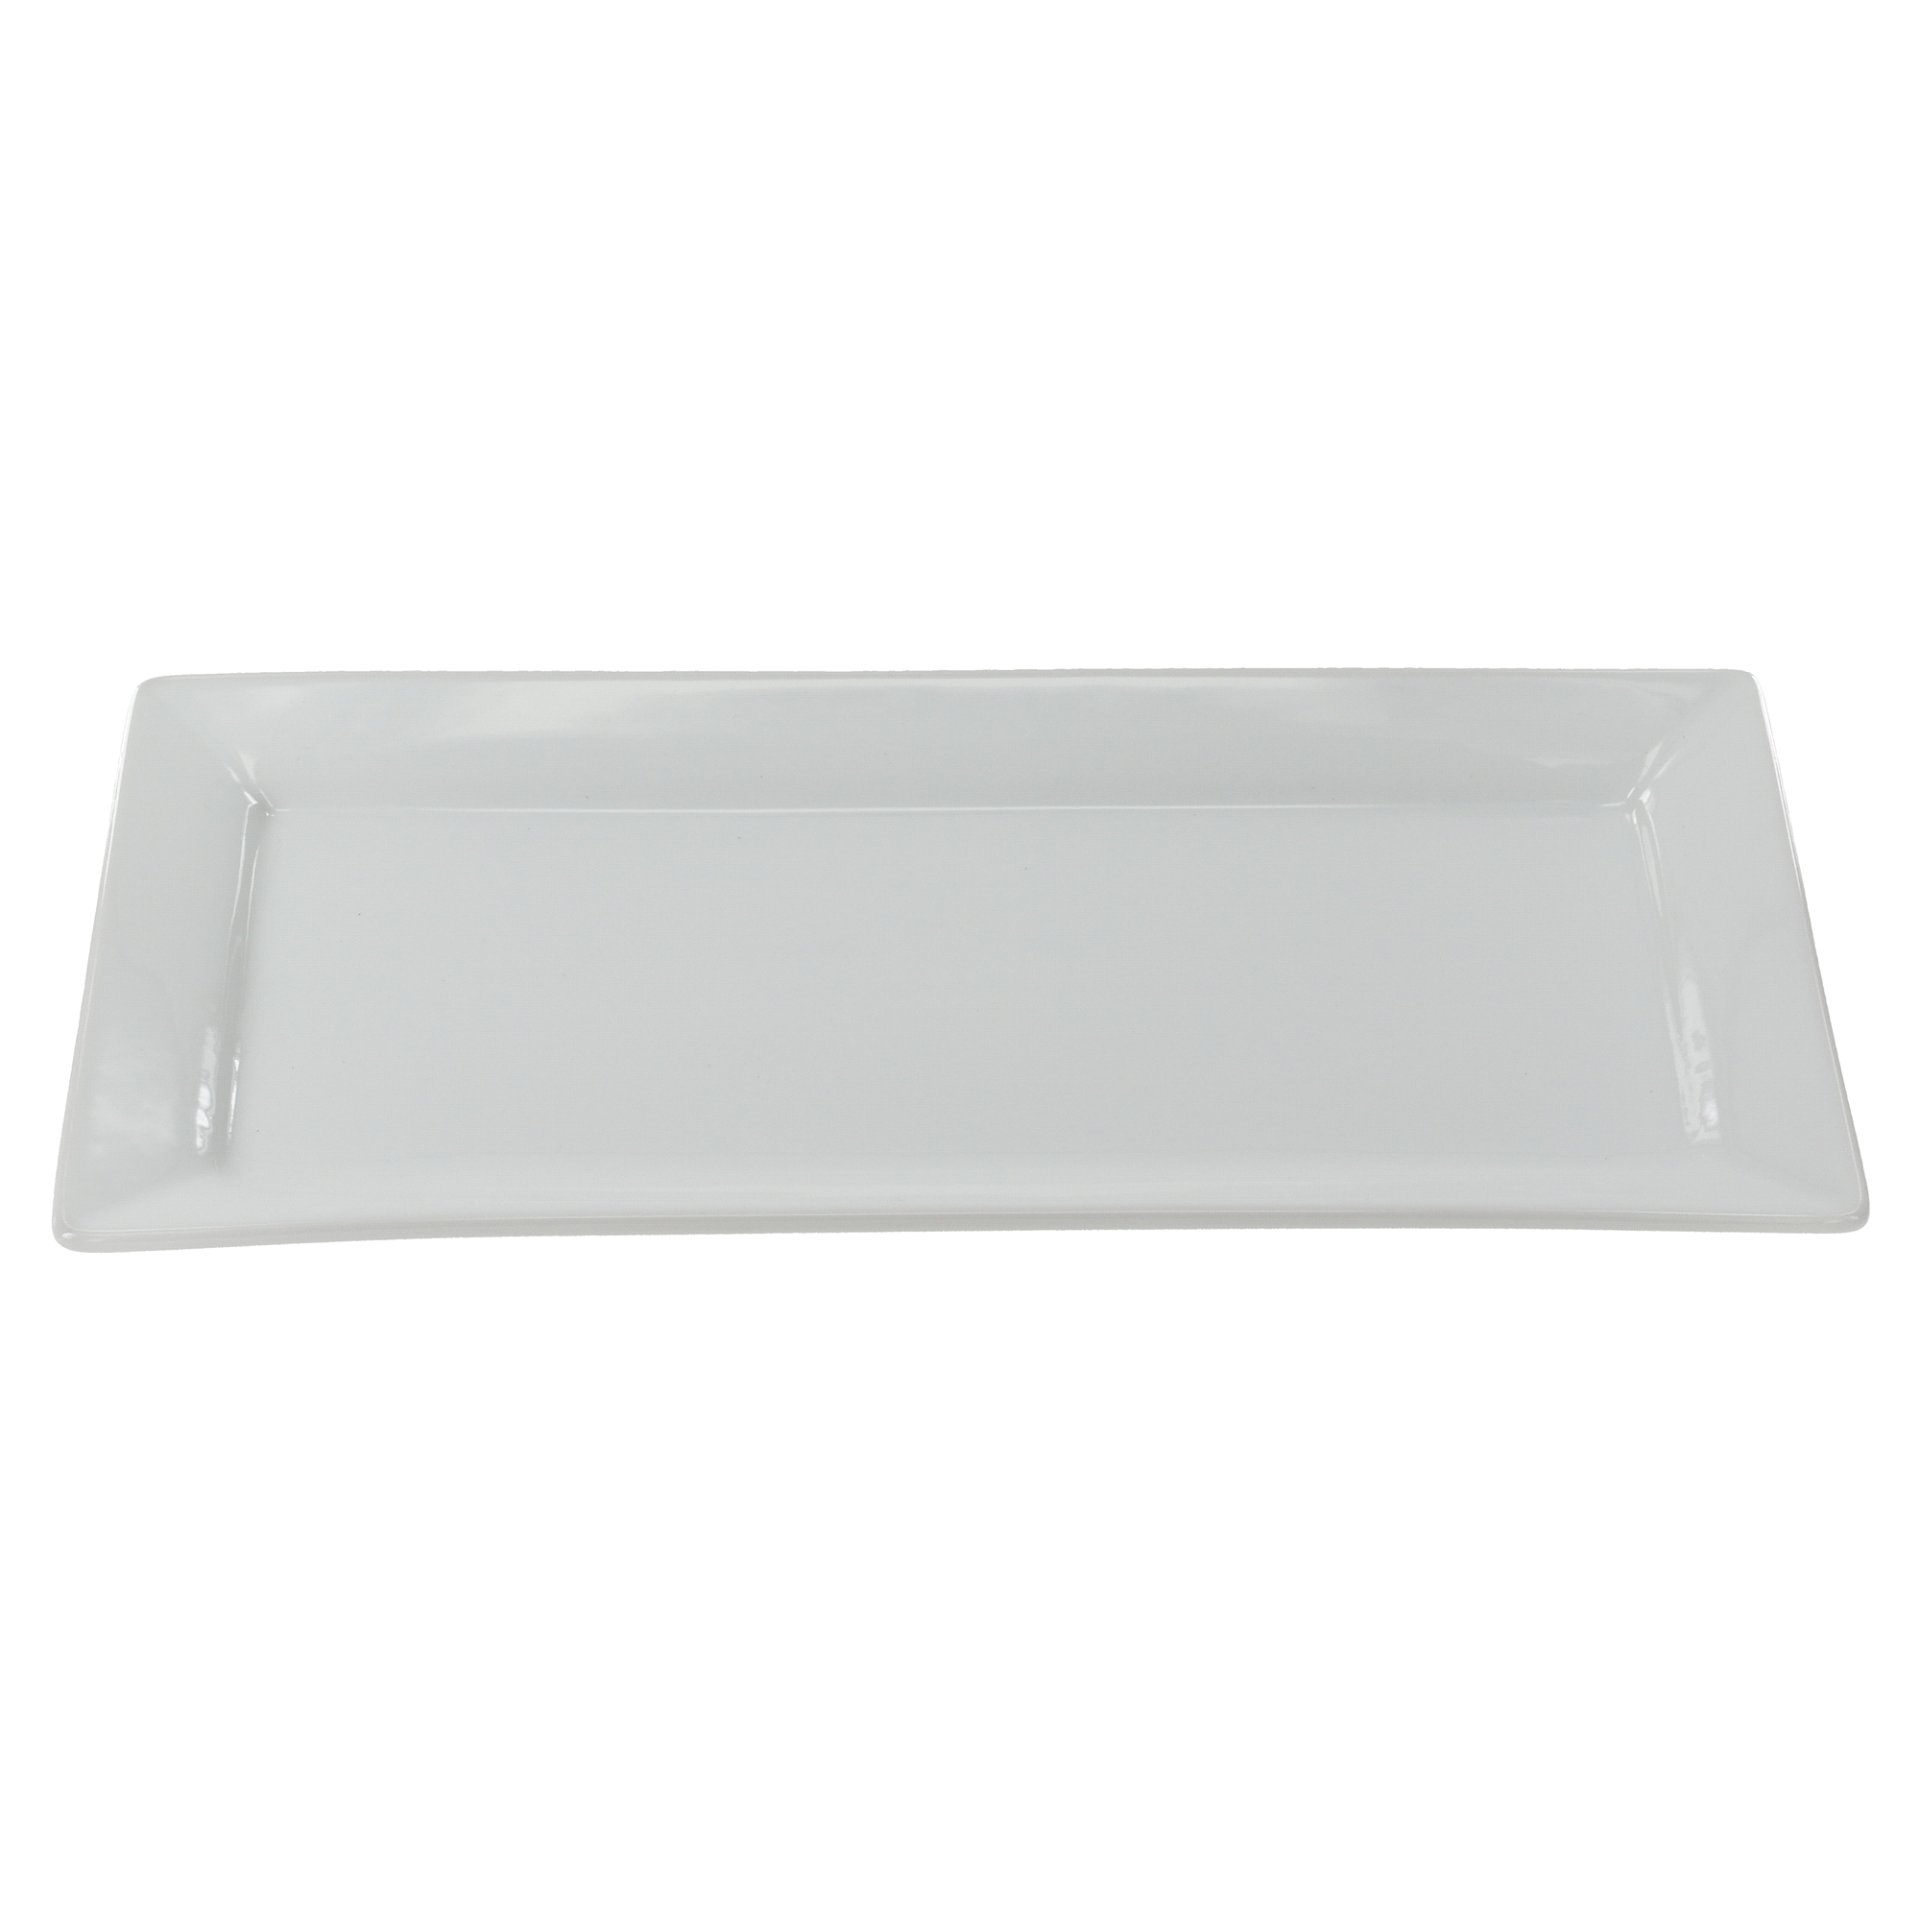 slide 1 of 1, Dash of That BIA Cordon Bleu Rectangular White Serving Platter 18 x 11 inches, 18 in x 11 in